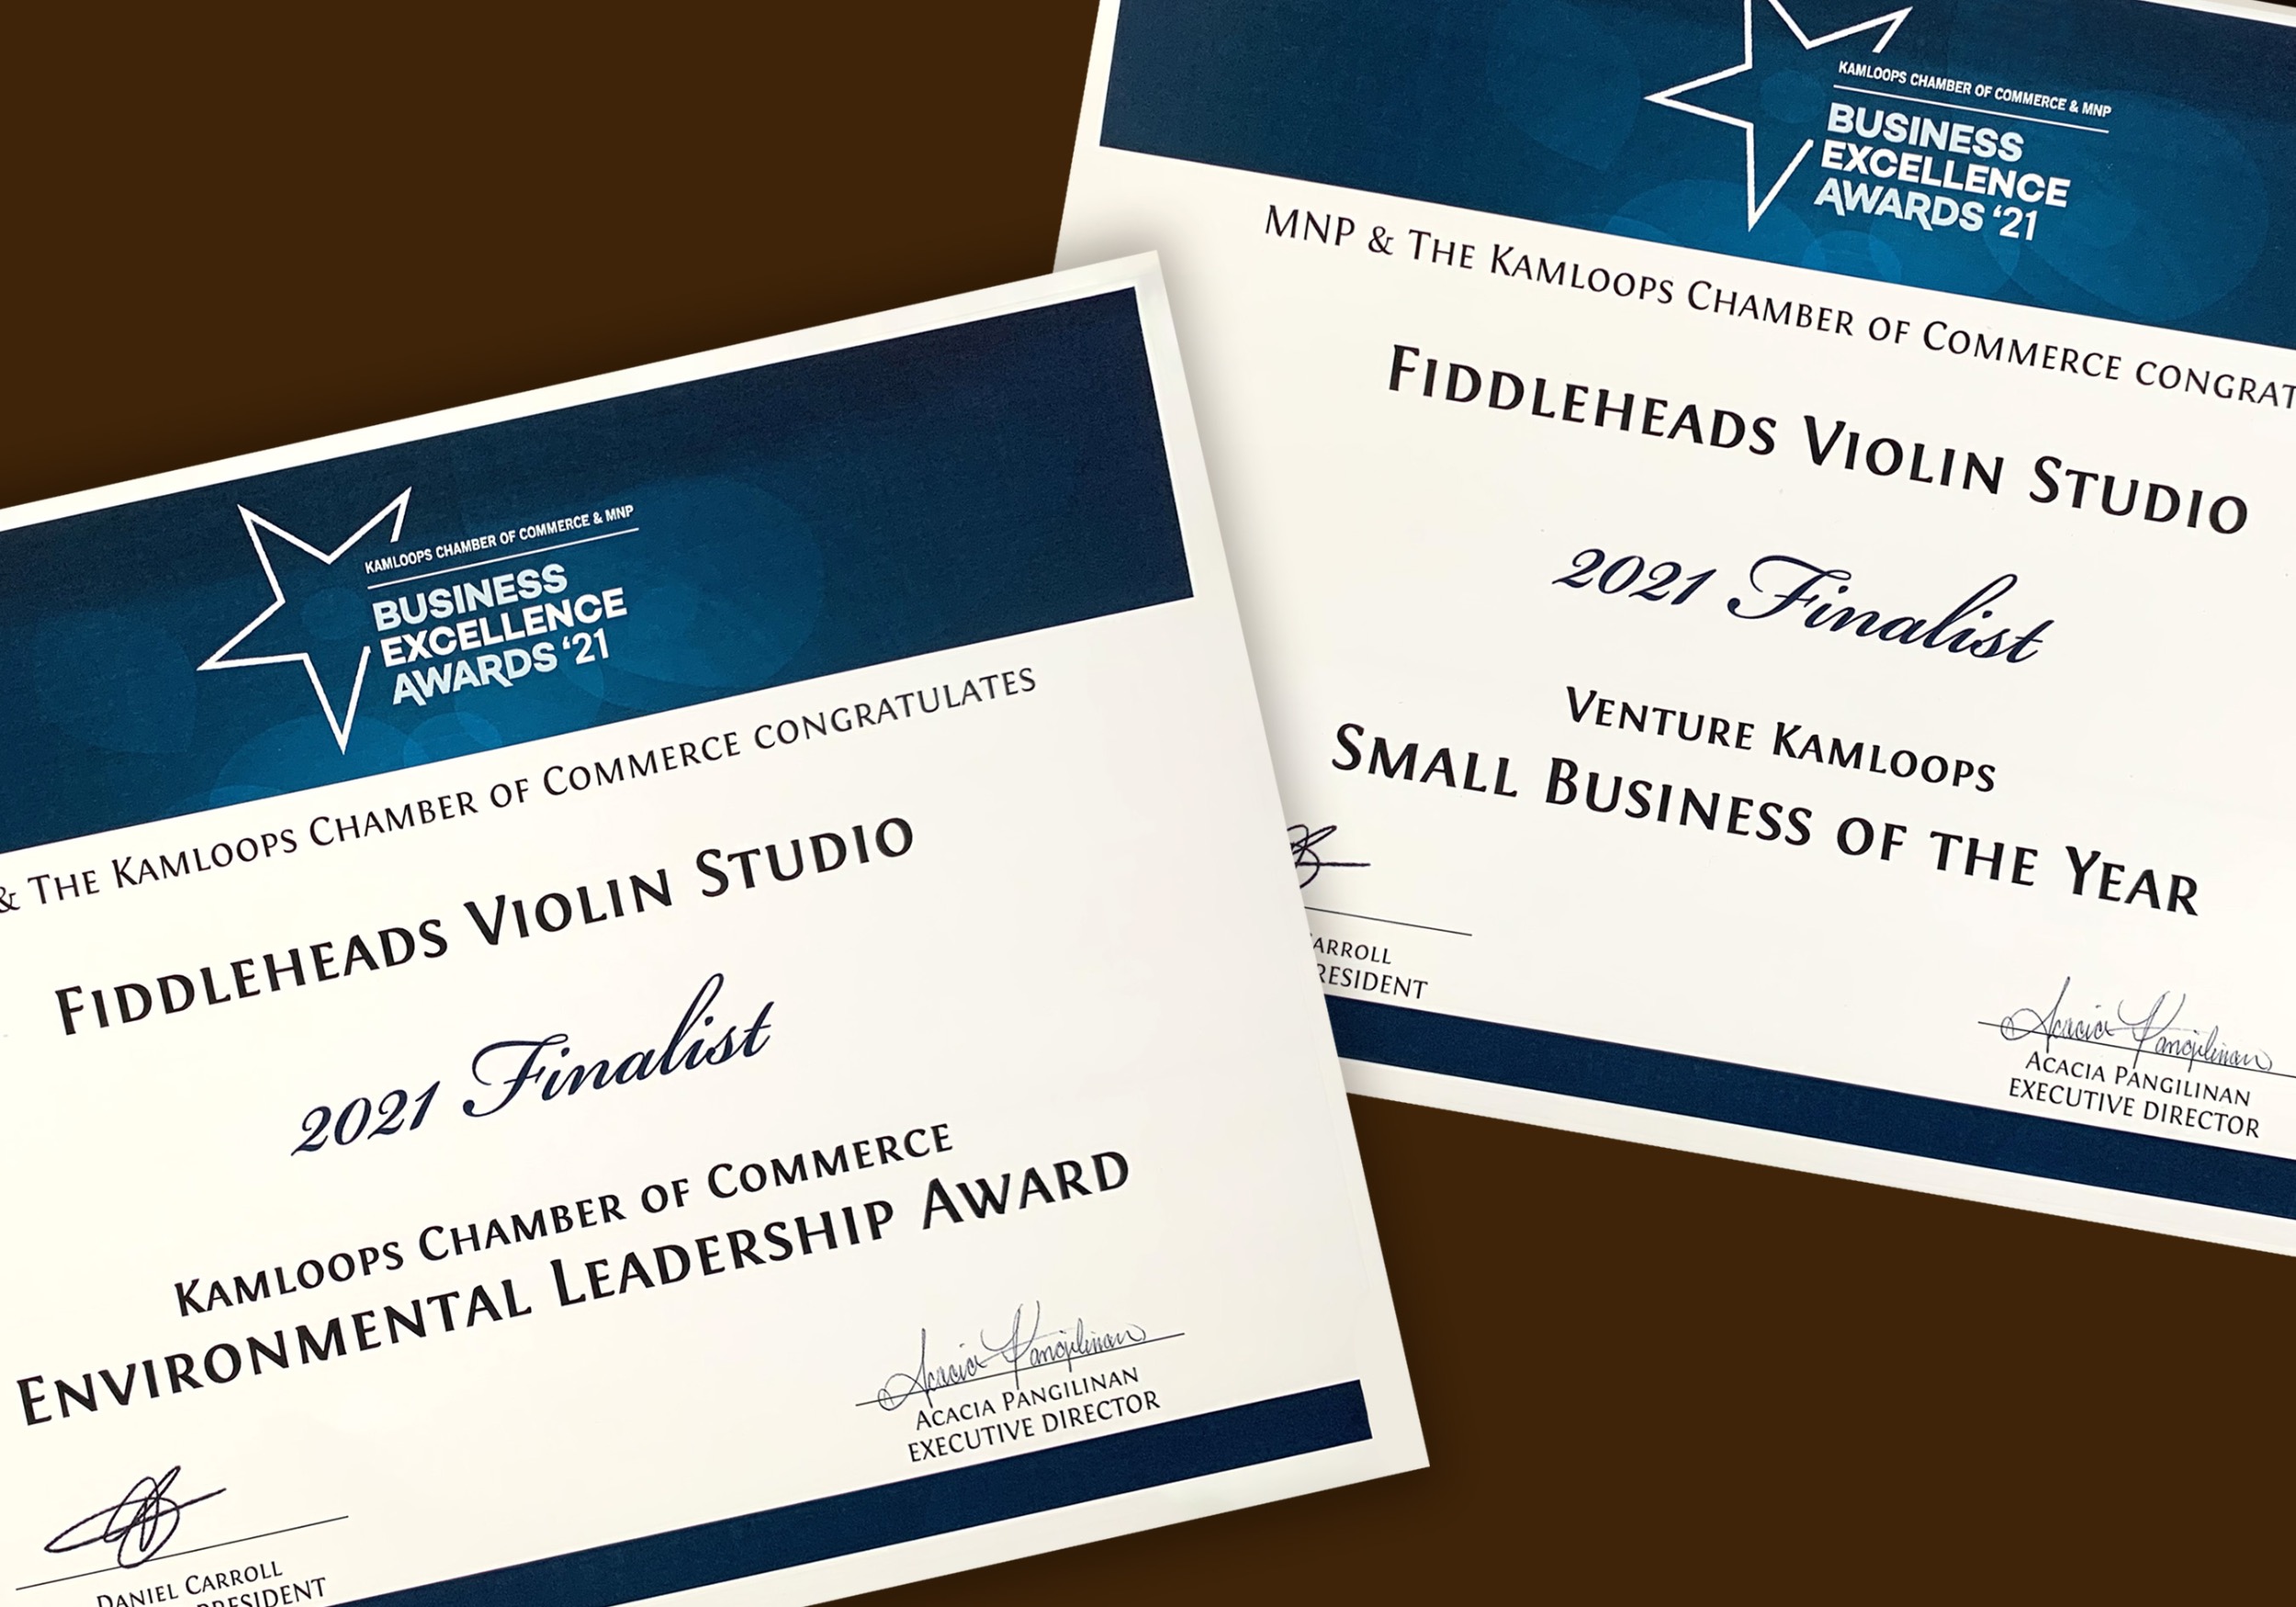 Two Finalists certificates presented to Fiddleheads for Environmental Leadership Award and Small Business of the Year